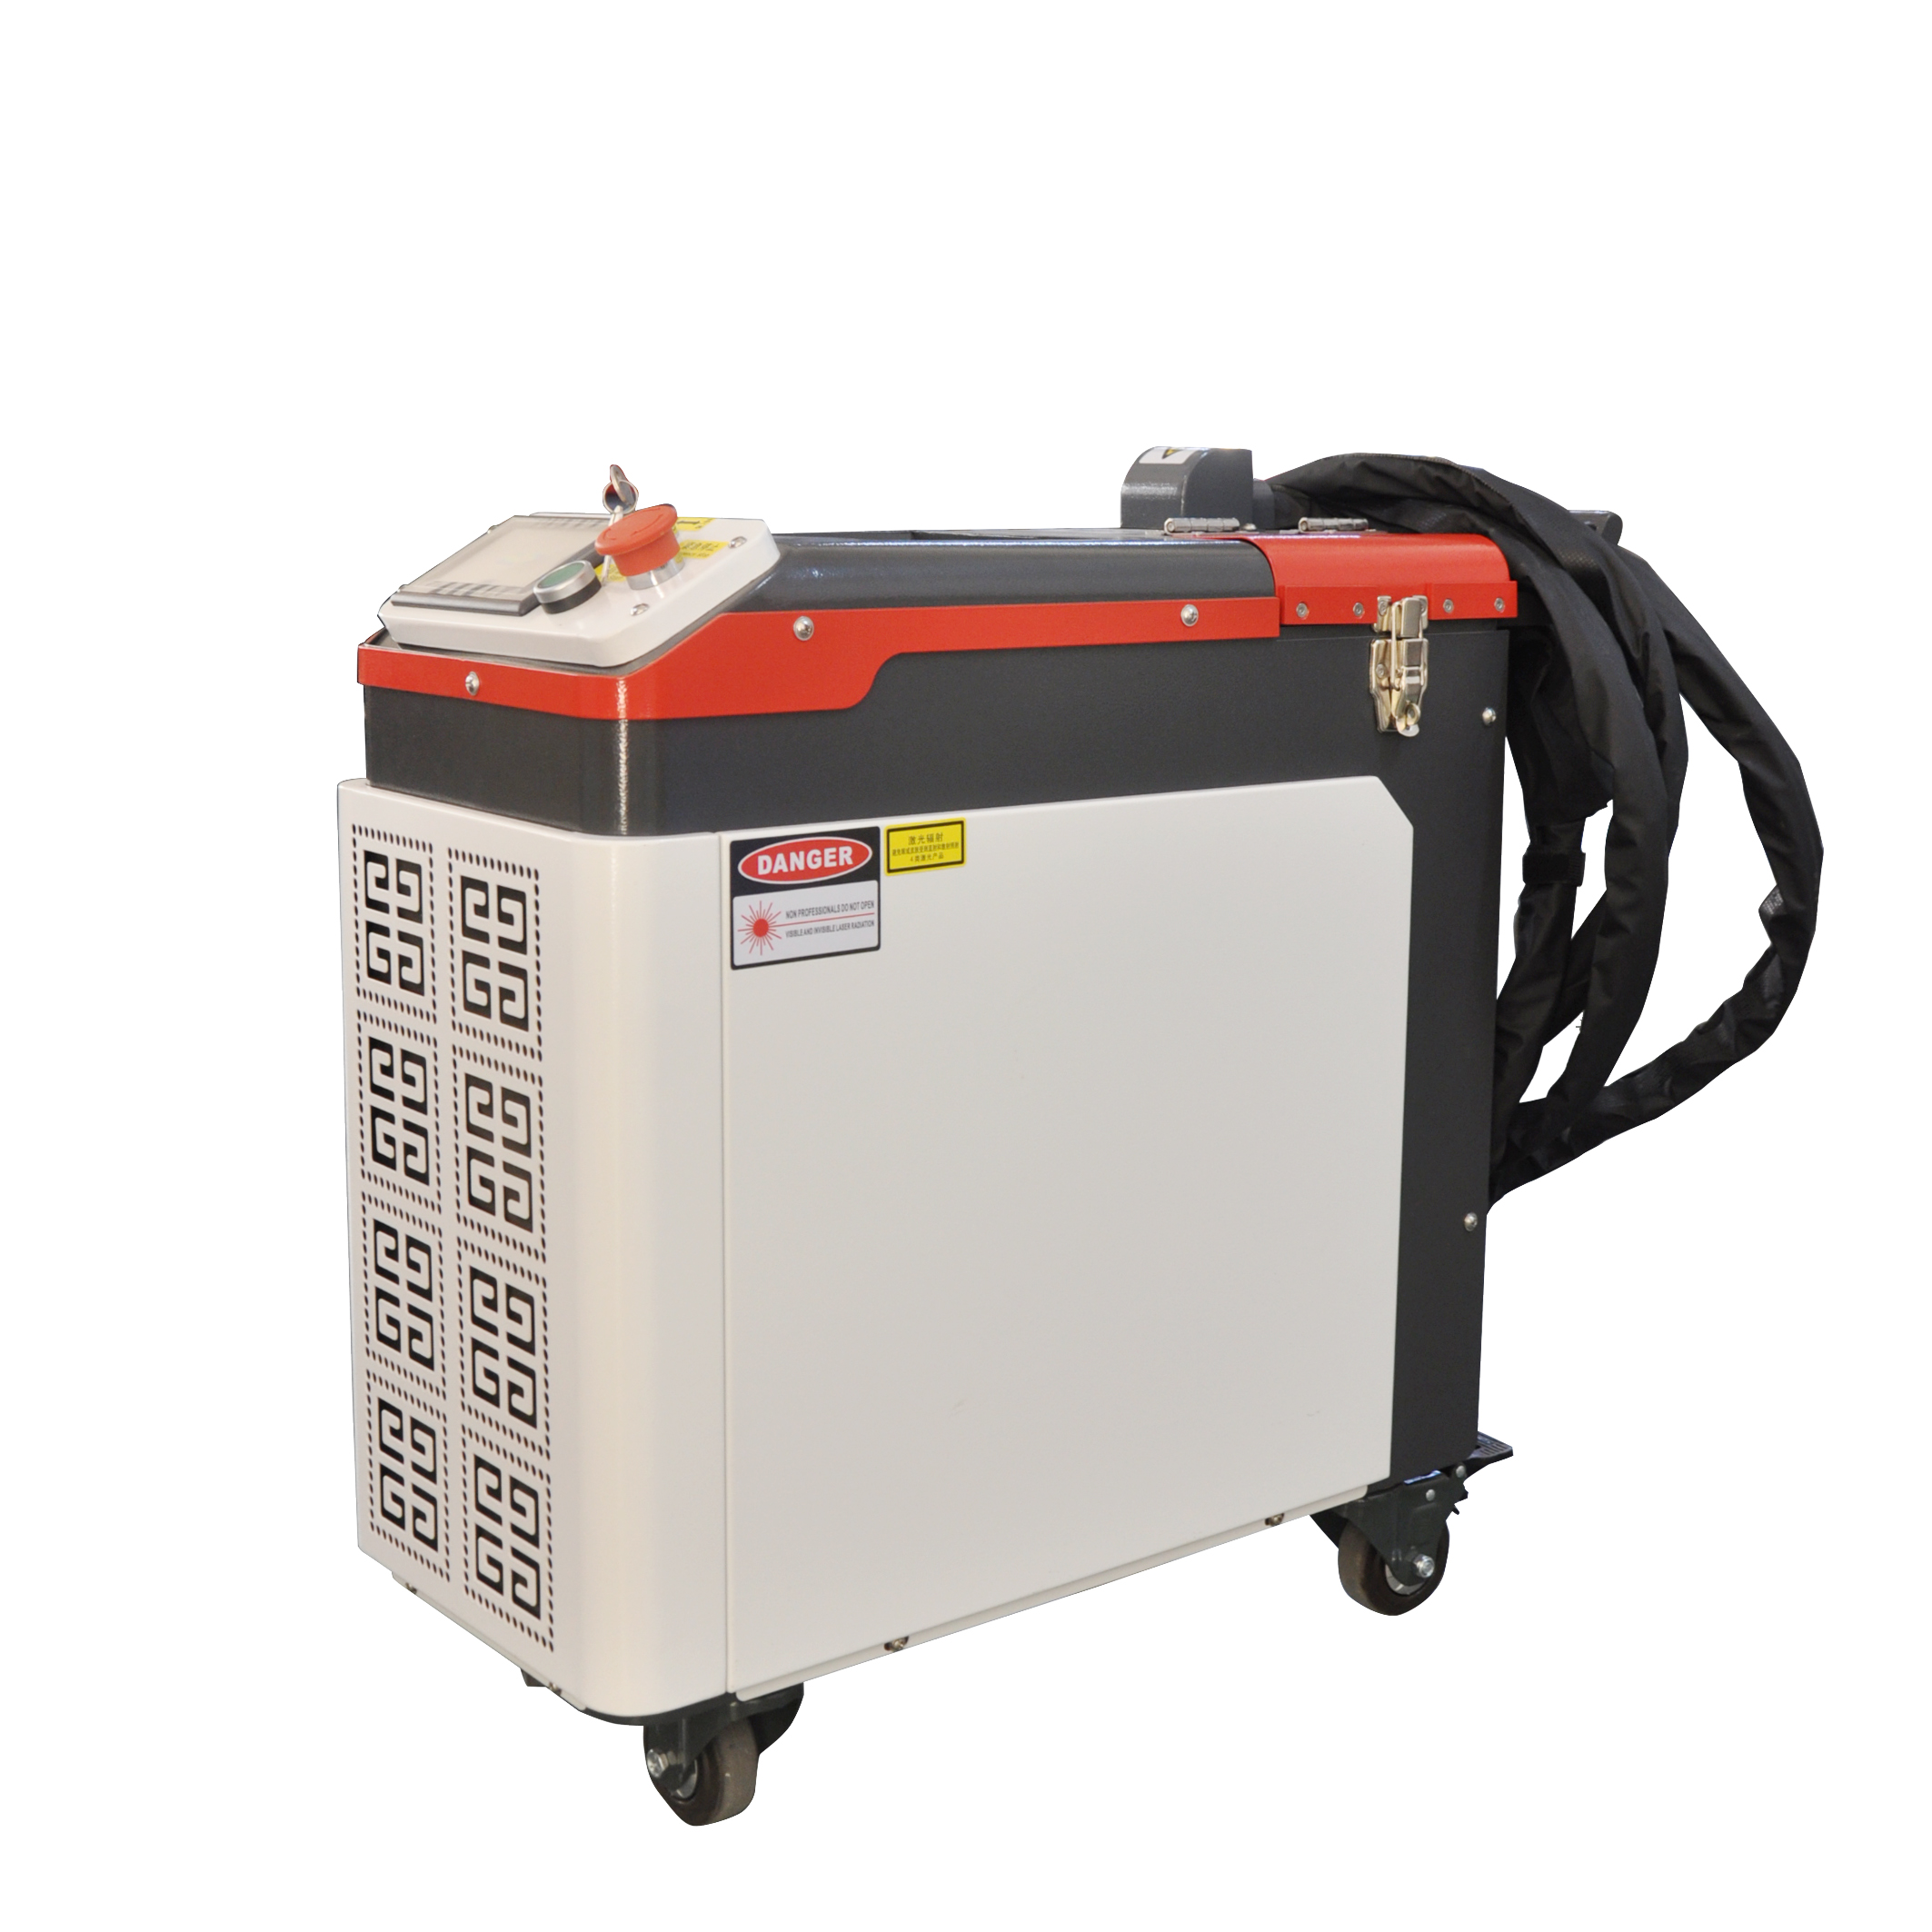 Portable JPT Raycus Rust Laser Cleaning Machine